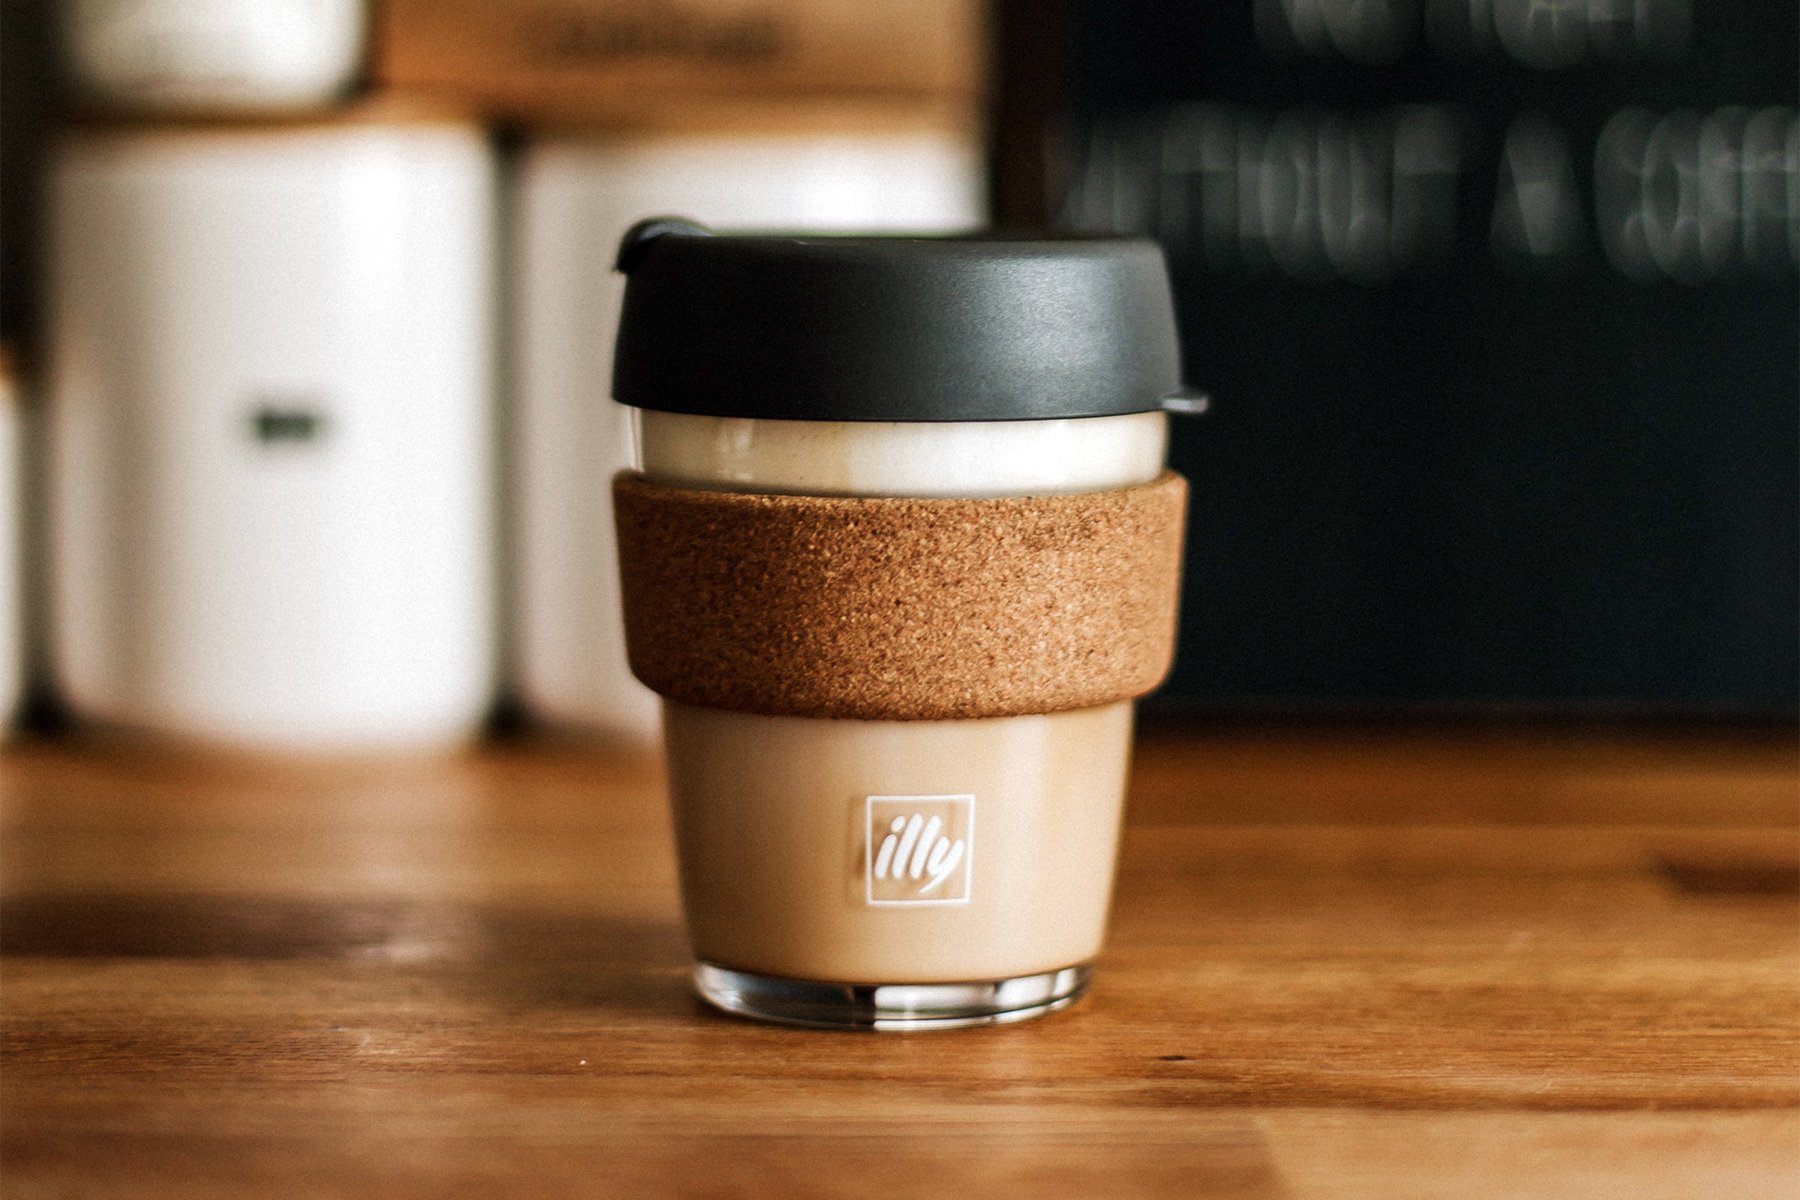 Strengthening the coffee industry by eliminating the reusable cup discount